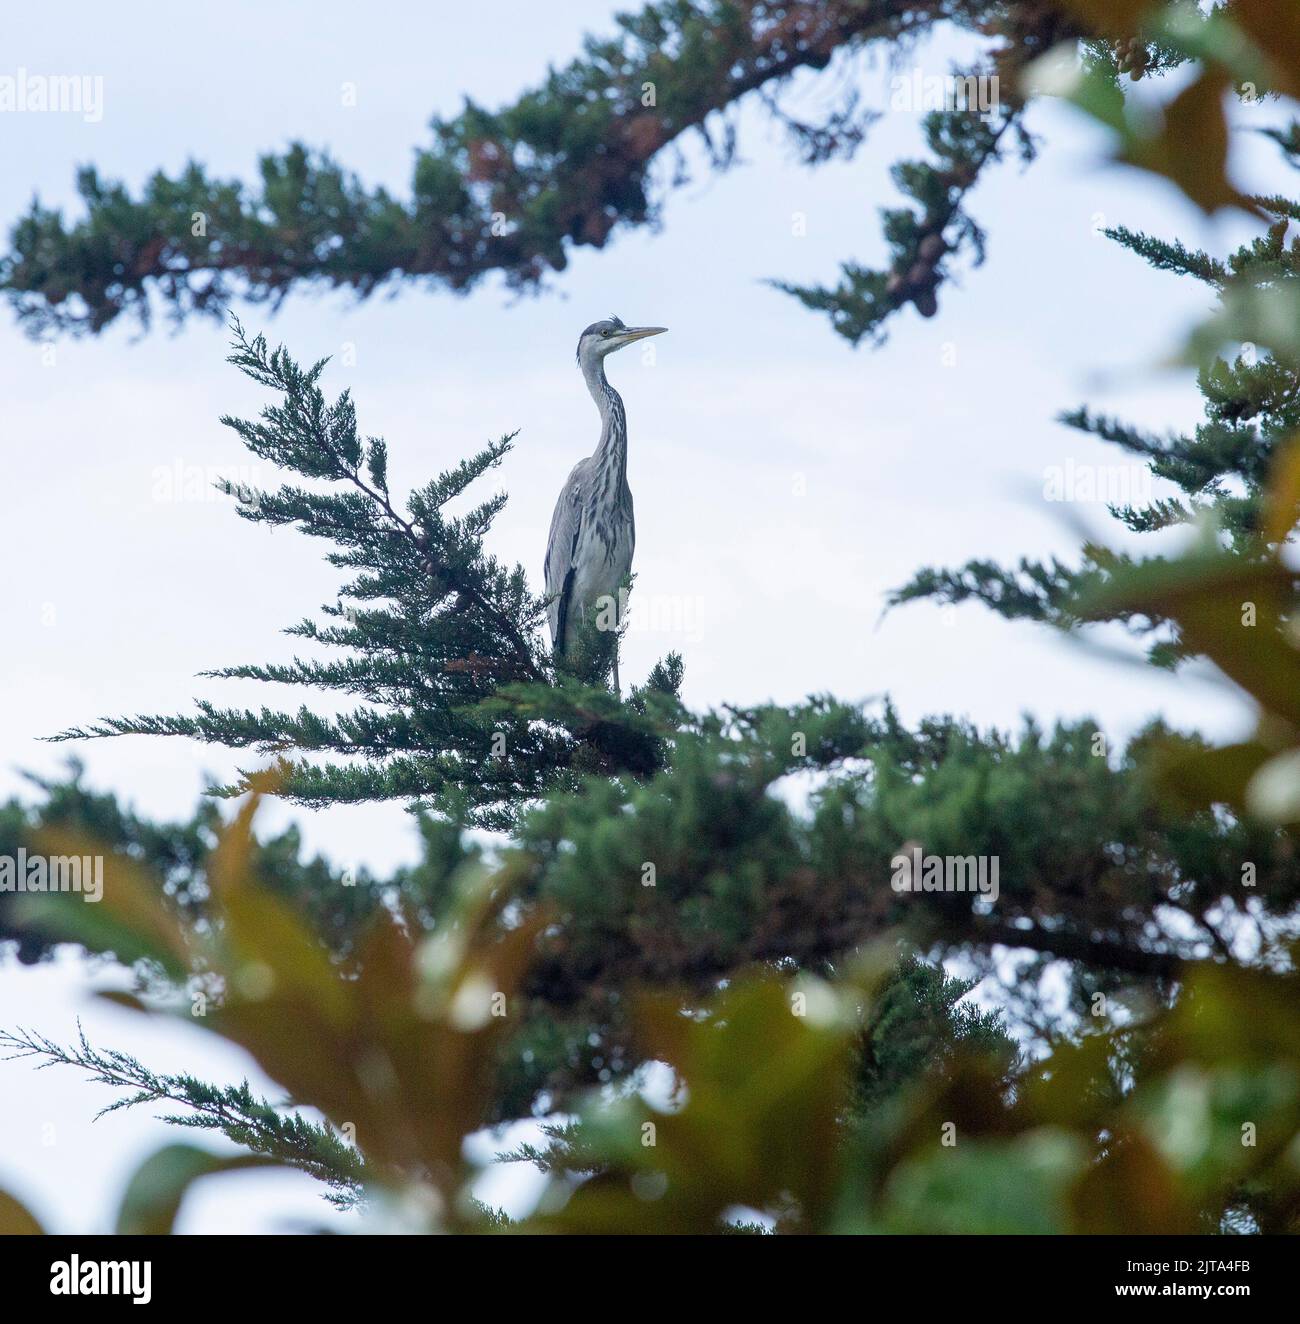 Sidmouth, Devon, 29th Aug 2022 A grey heron sits in a Monterey Cyprus tree high above a garden pond in Devon. Shortage of rain has left river levels at an all-time low, forcing herons and other predatory birds to look for their fish supper in gardens. Tony Charnock/Alamy Live News Stock Photo